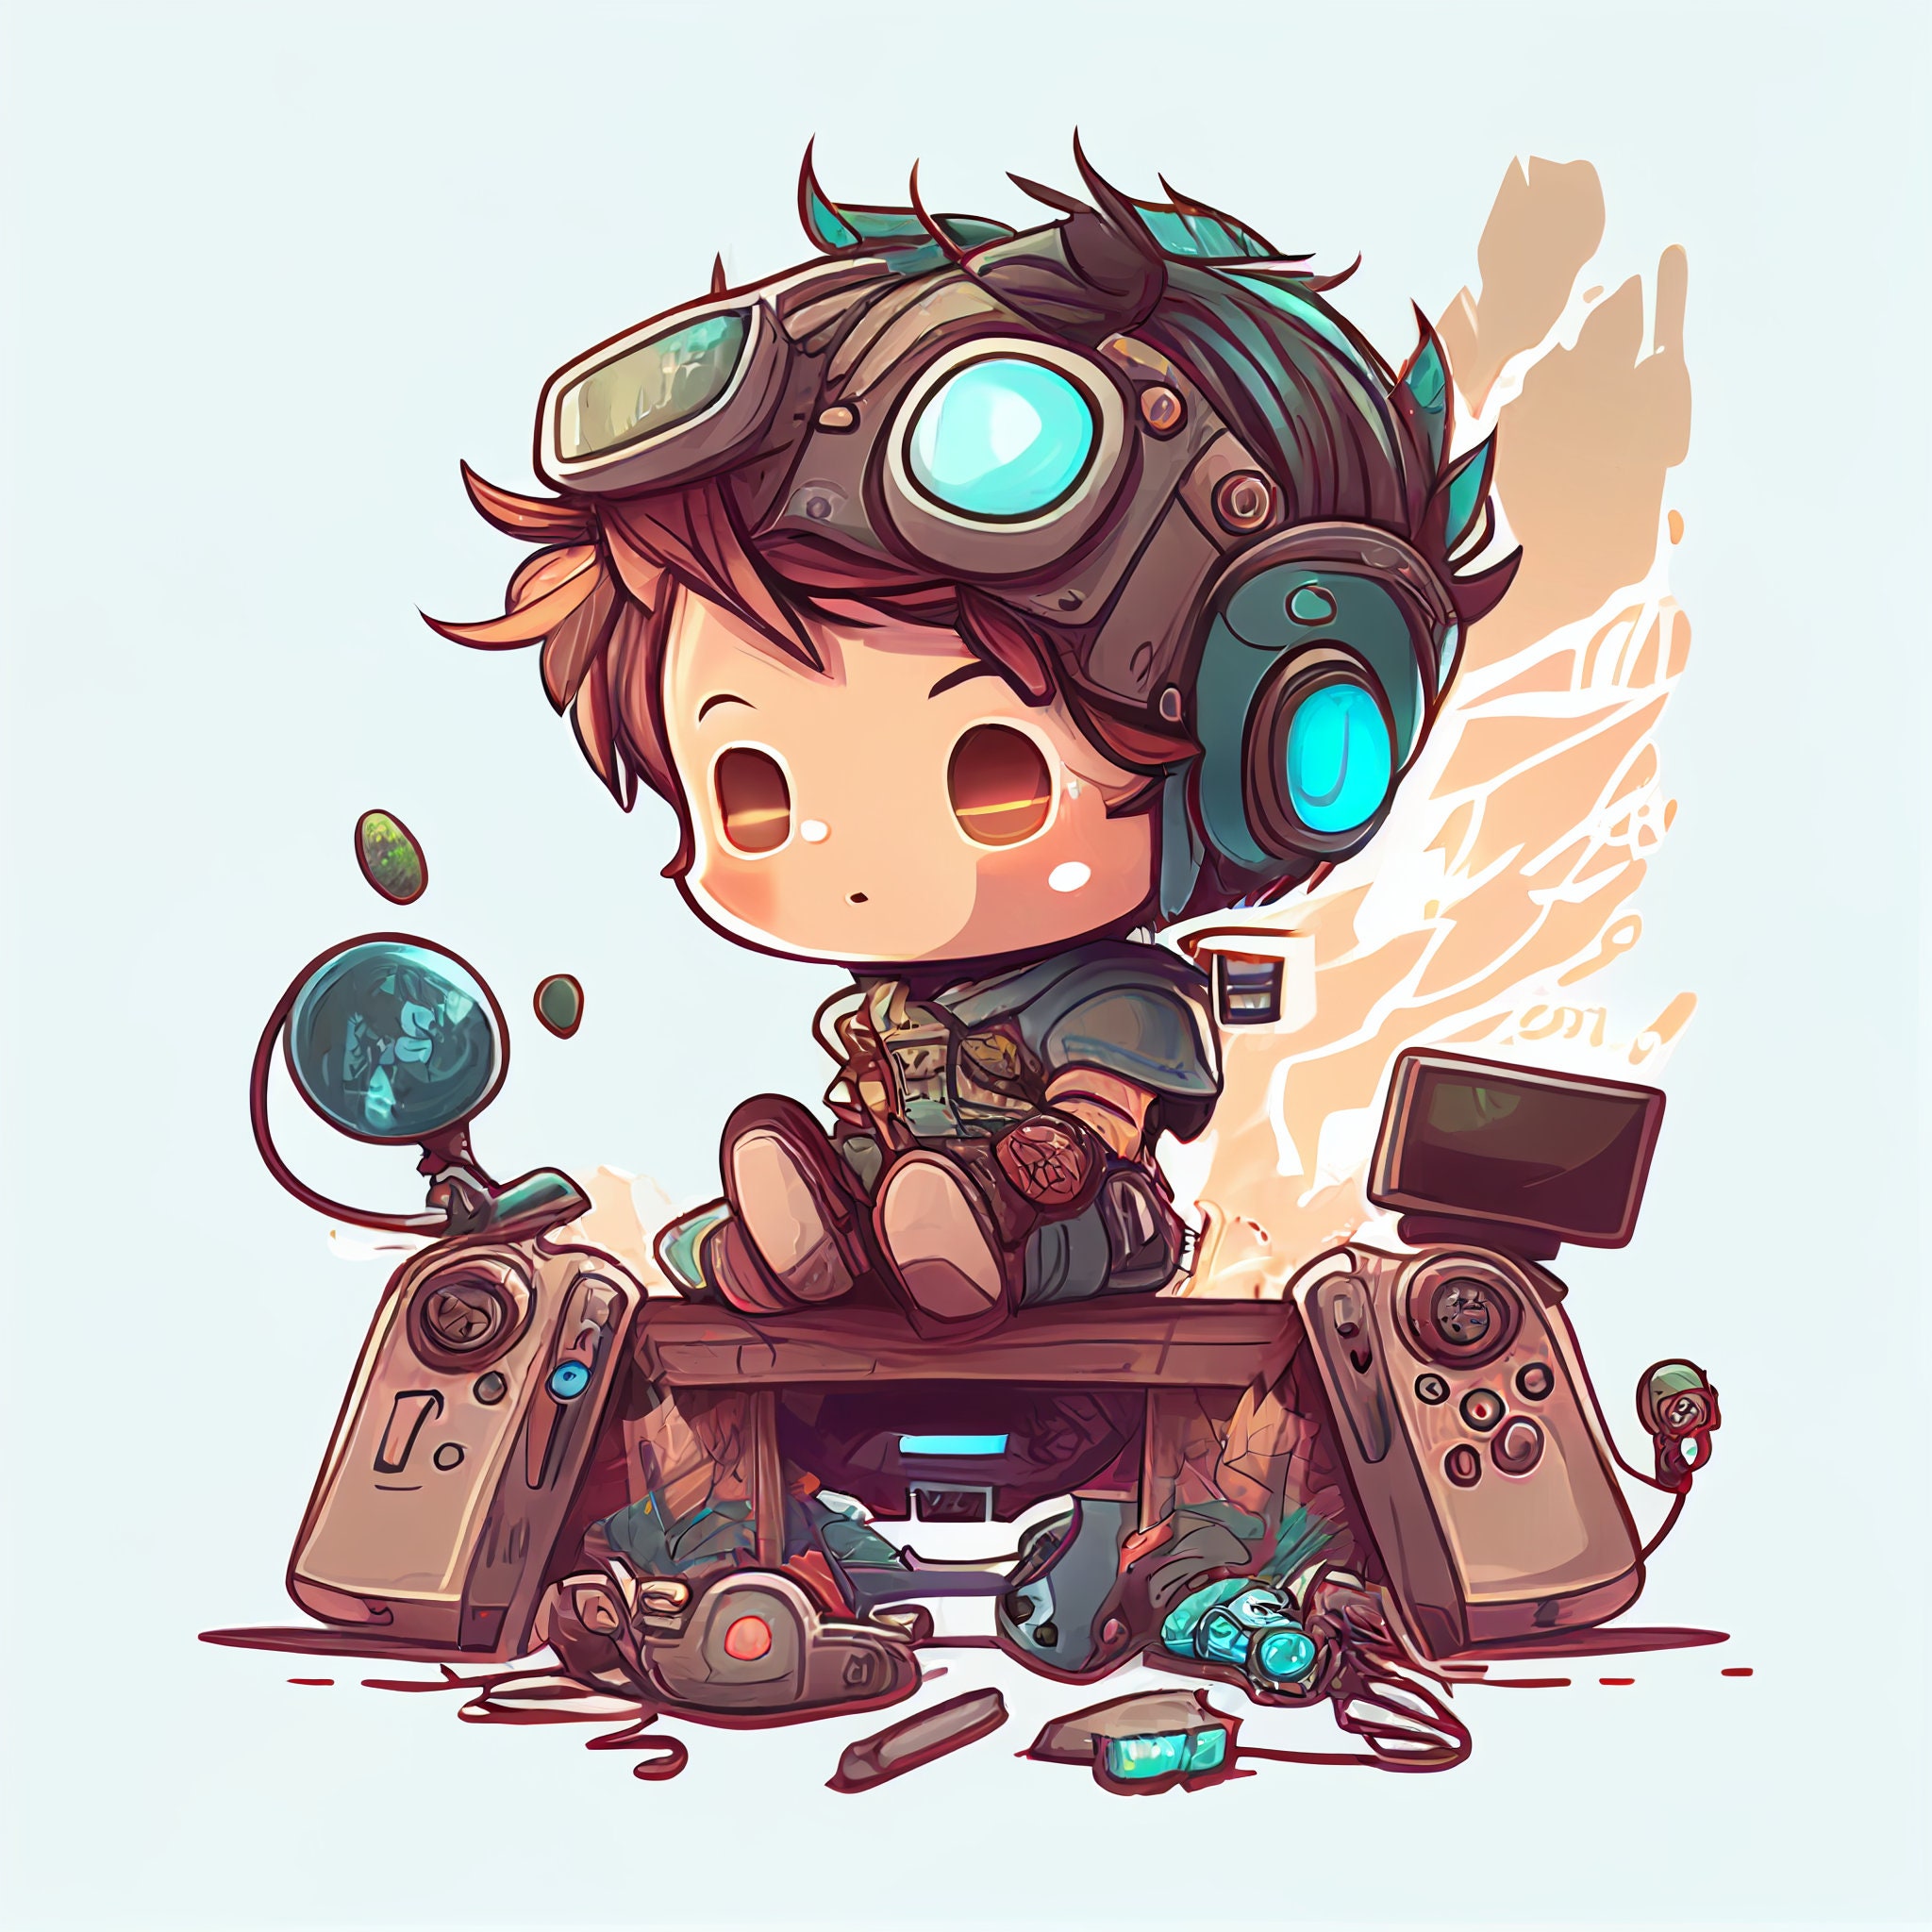 Chibi Avatar Icon with Background - Artists&Clients